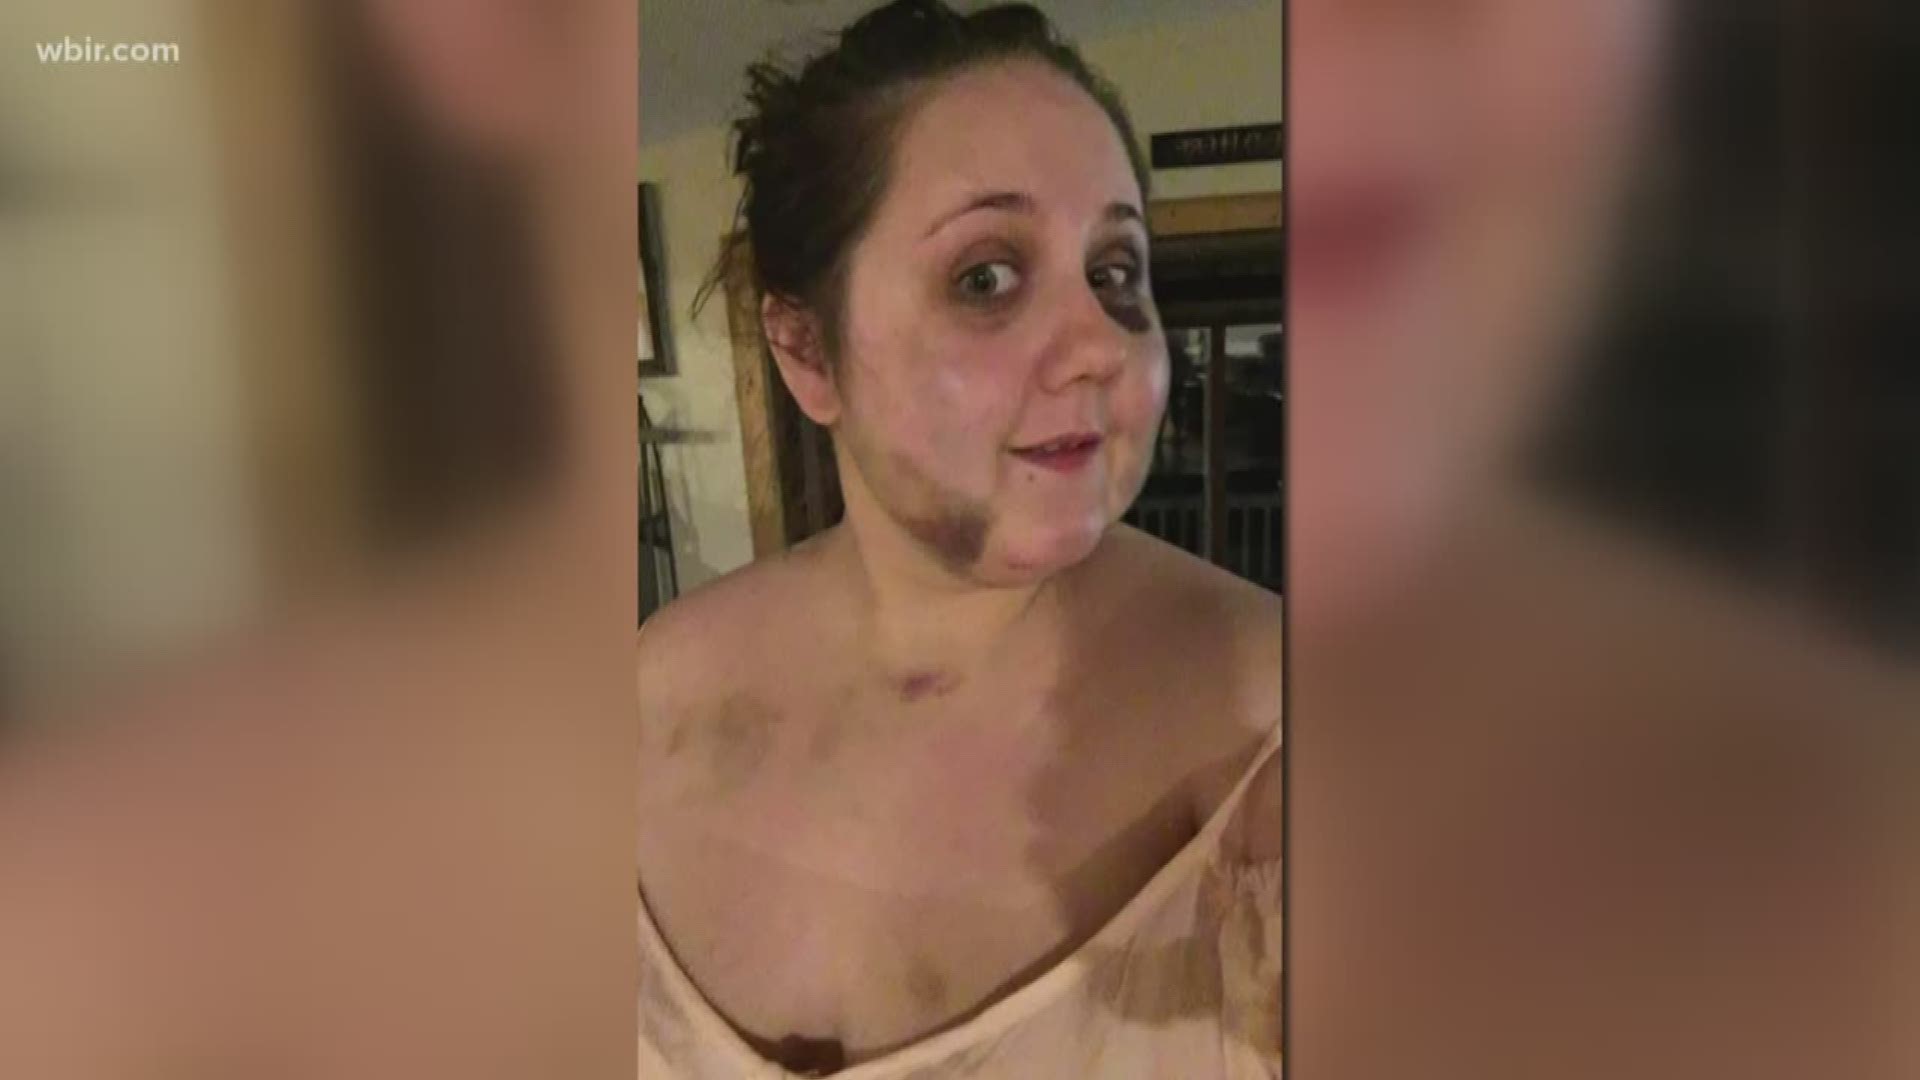 A Sevierville woman is speaking out after suffering what she says were years of physical and mental abuse from her husband.